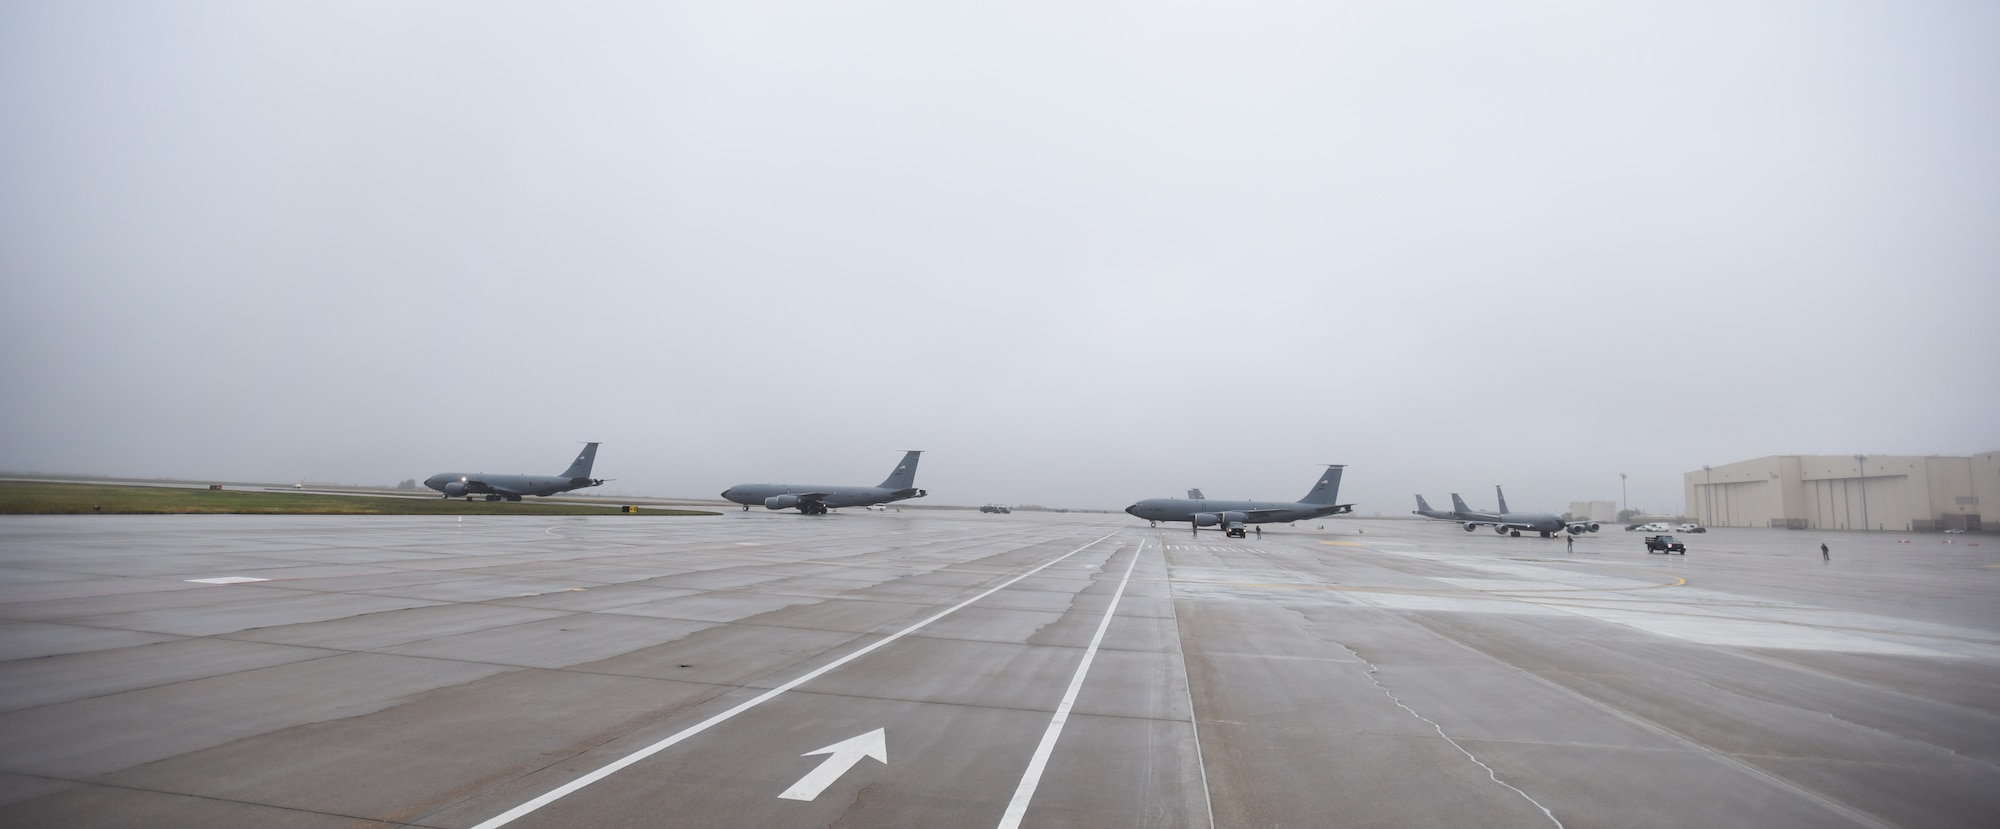 KC-135 Stratotankers taxis prior to take-off during Exercise Global Thunder 2018 Nov. 4, at McConnell Air Force Base, Kan. The scenario for the exercise integrates a variety of strategic threats to our nation and calls upon all the U.S. Strategic Command capabilities that would be provided to geographic combatant commanders in a real-world crisis. (U.S. Air Force photo by Amn Michaela R. Slanchik)